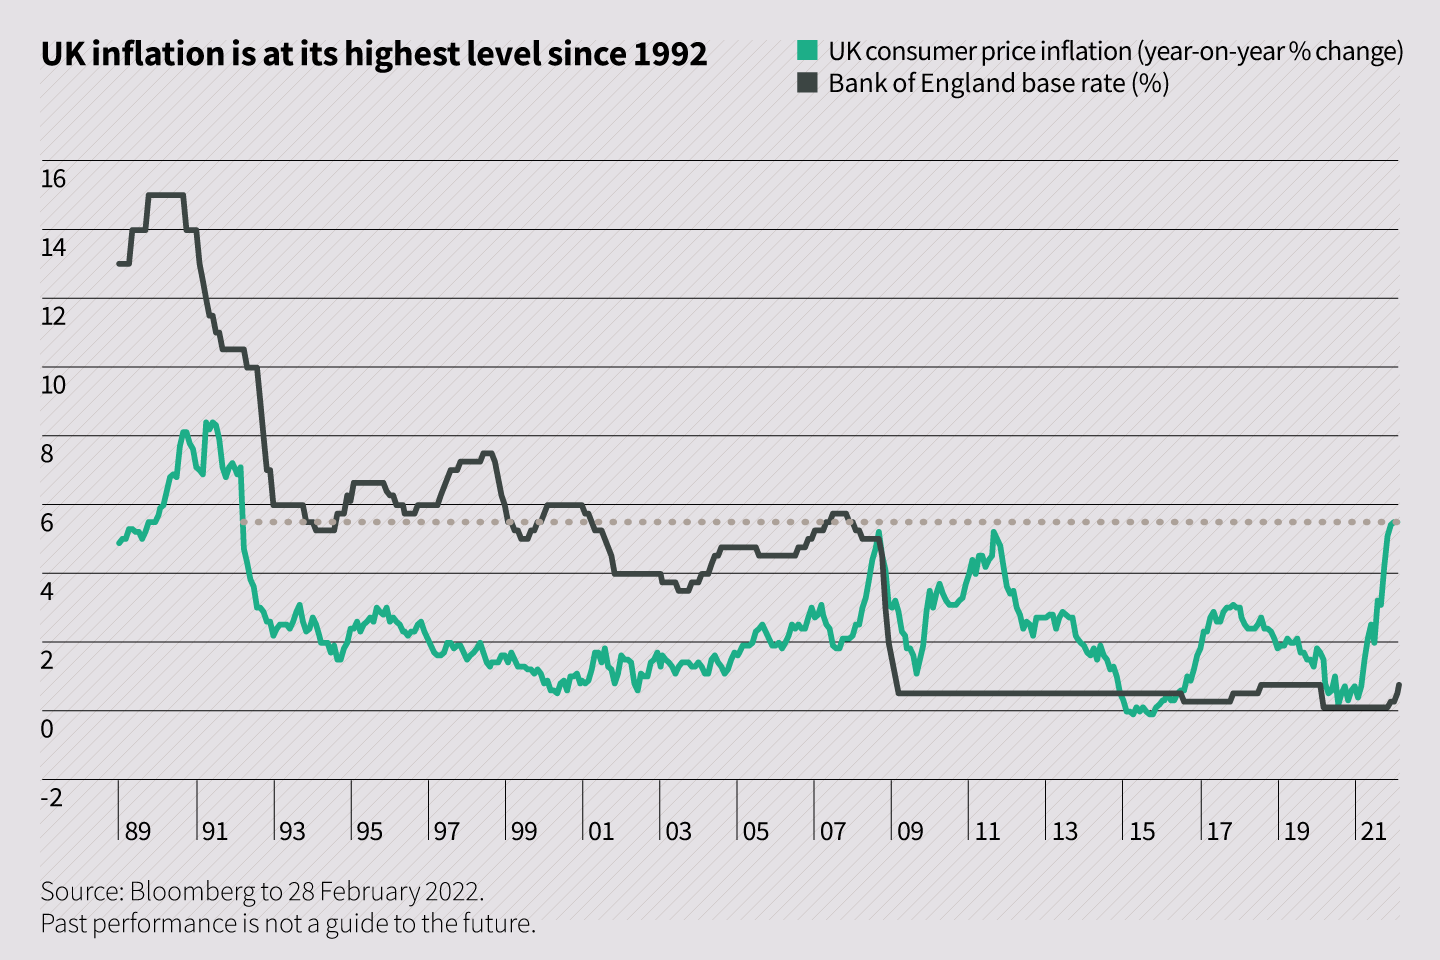 UK inflation is at its highest level since 1992